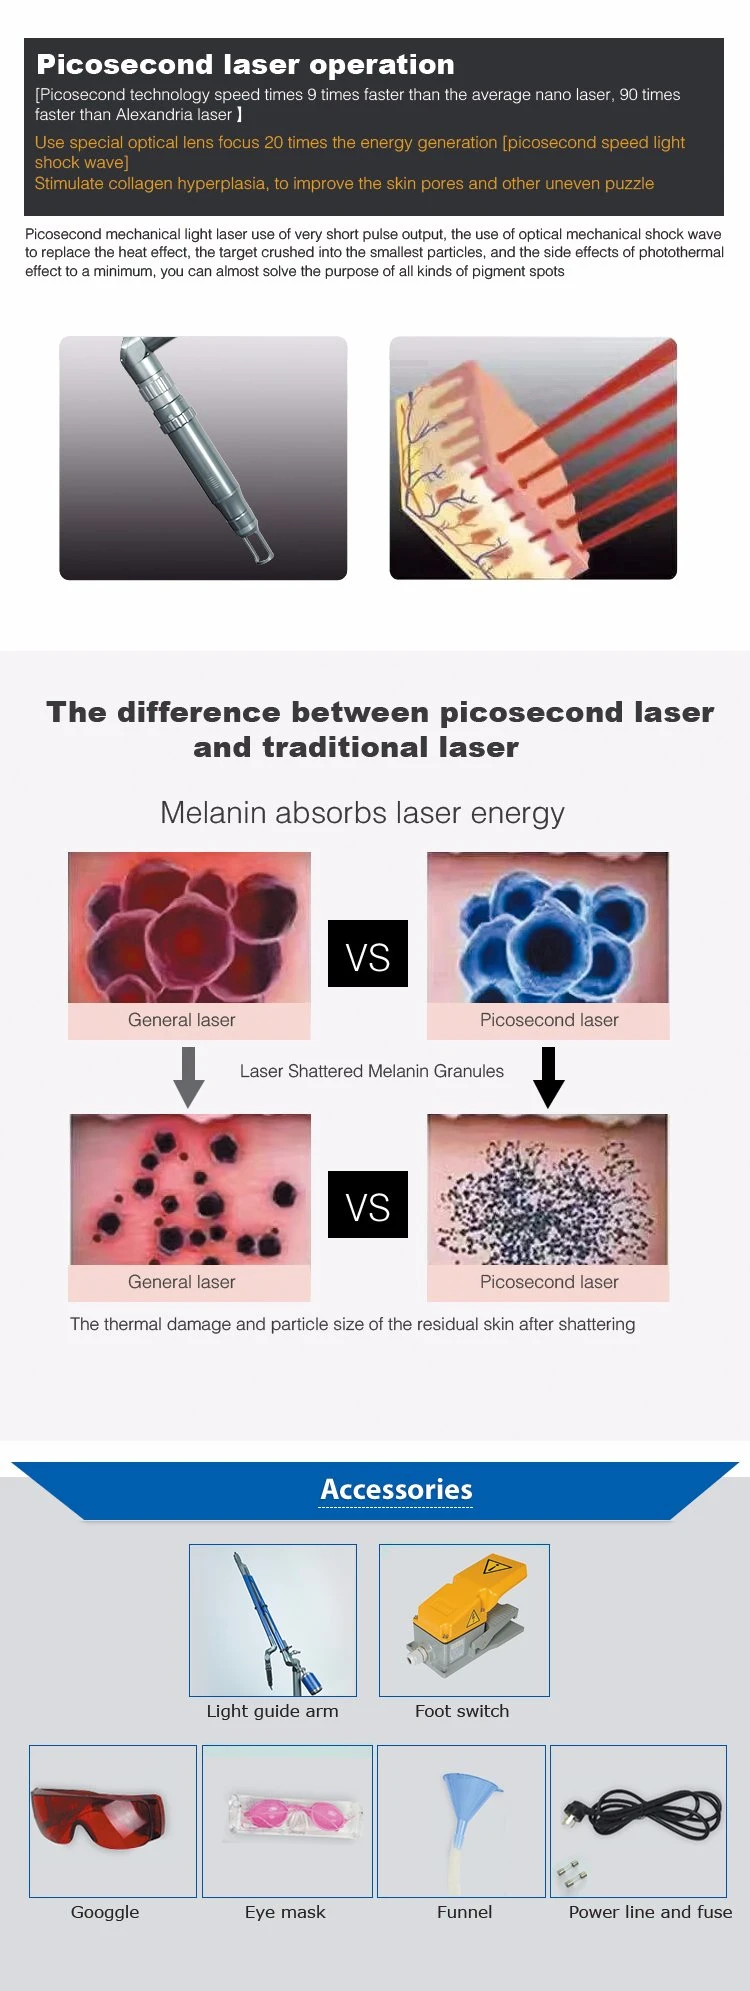 Renlang laser Tattoo Removal Picosecond Laser Removal Tattoo Pigment